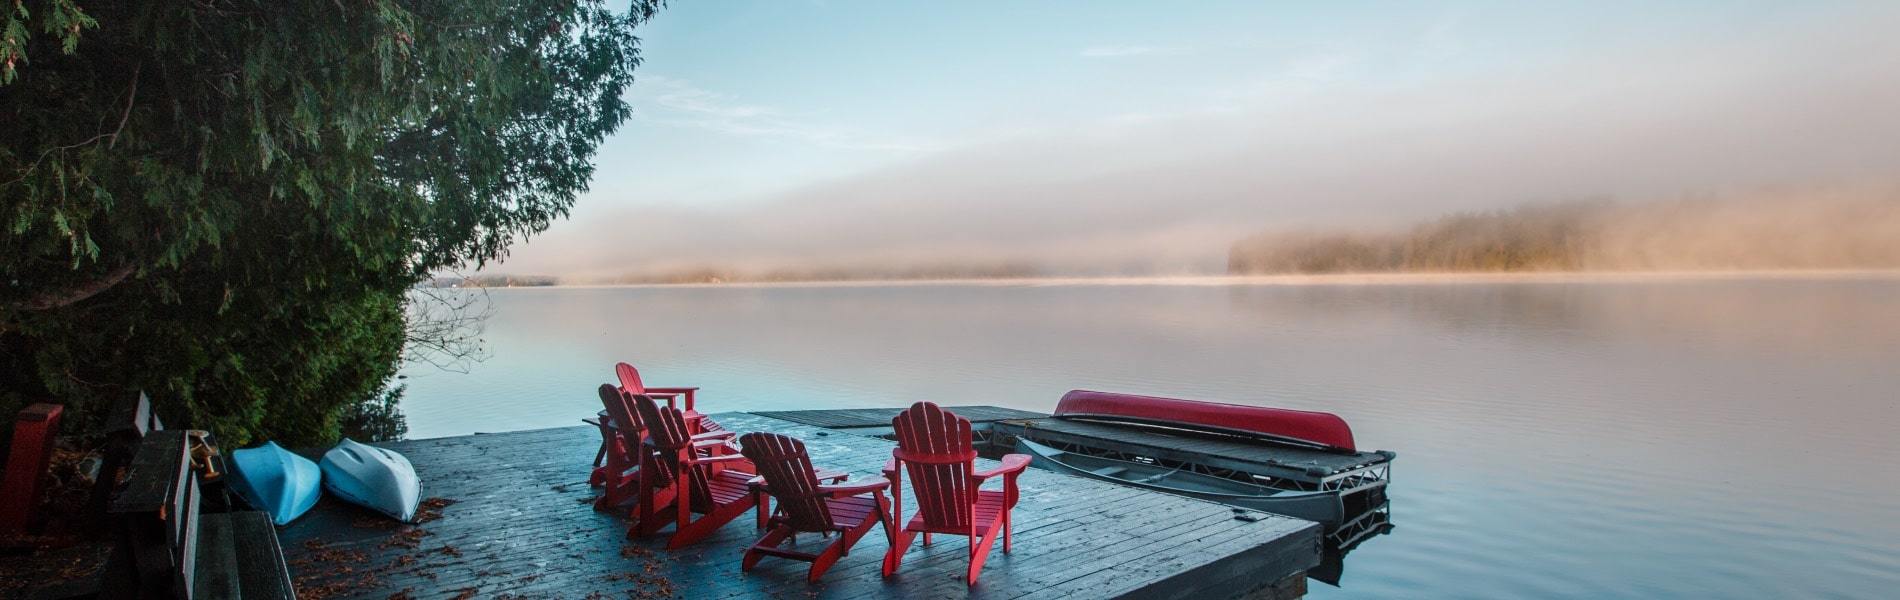 Muskoka chairs on an Ontario lake dock looking out over a beautiful sunset.